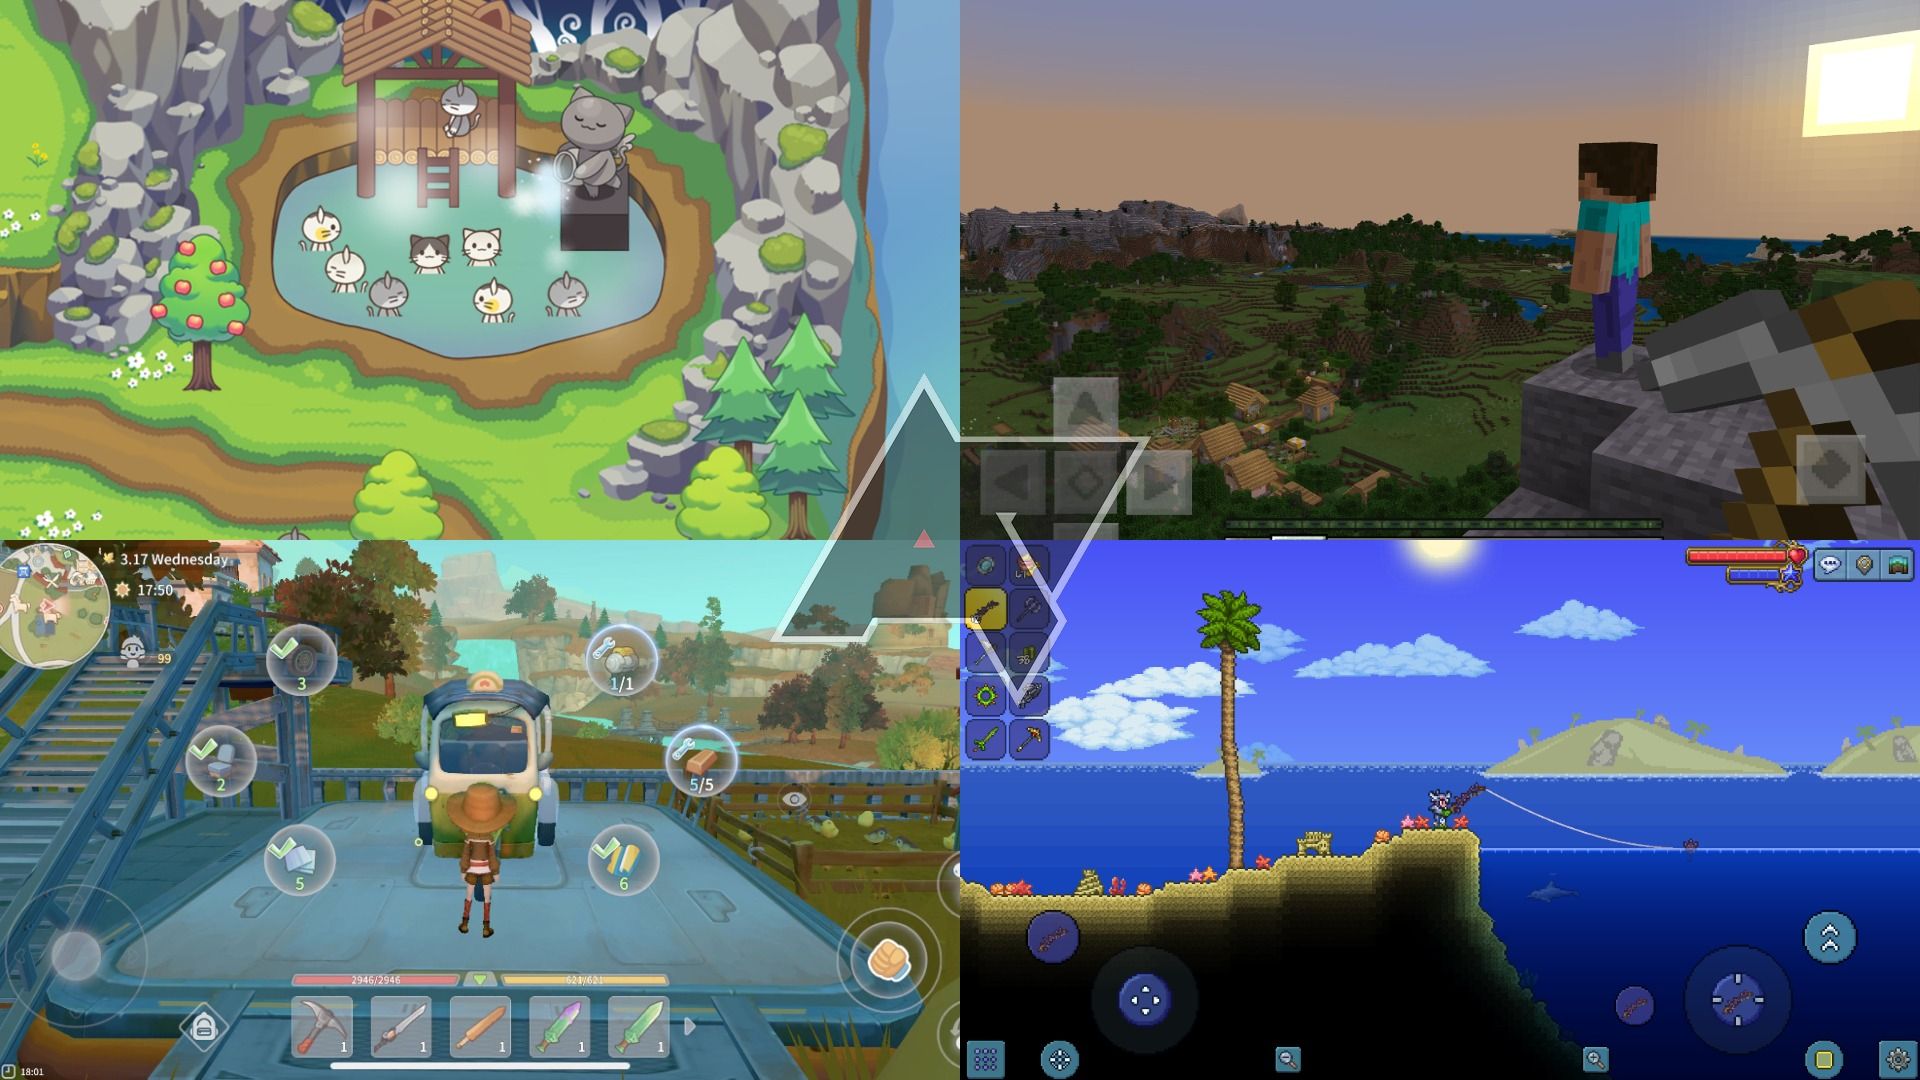 melhores-jogos-de-animal-crossing-android-cat-forest-minecraft-my-time-at-portia-terraria-collage